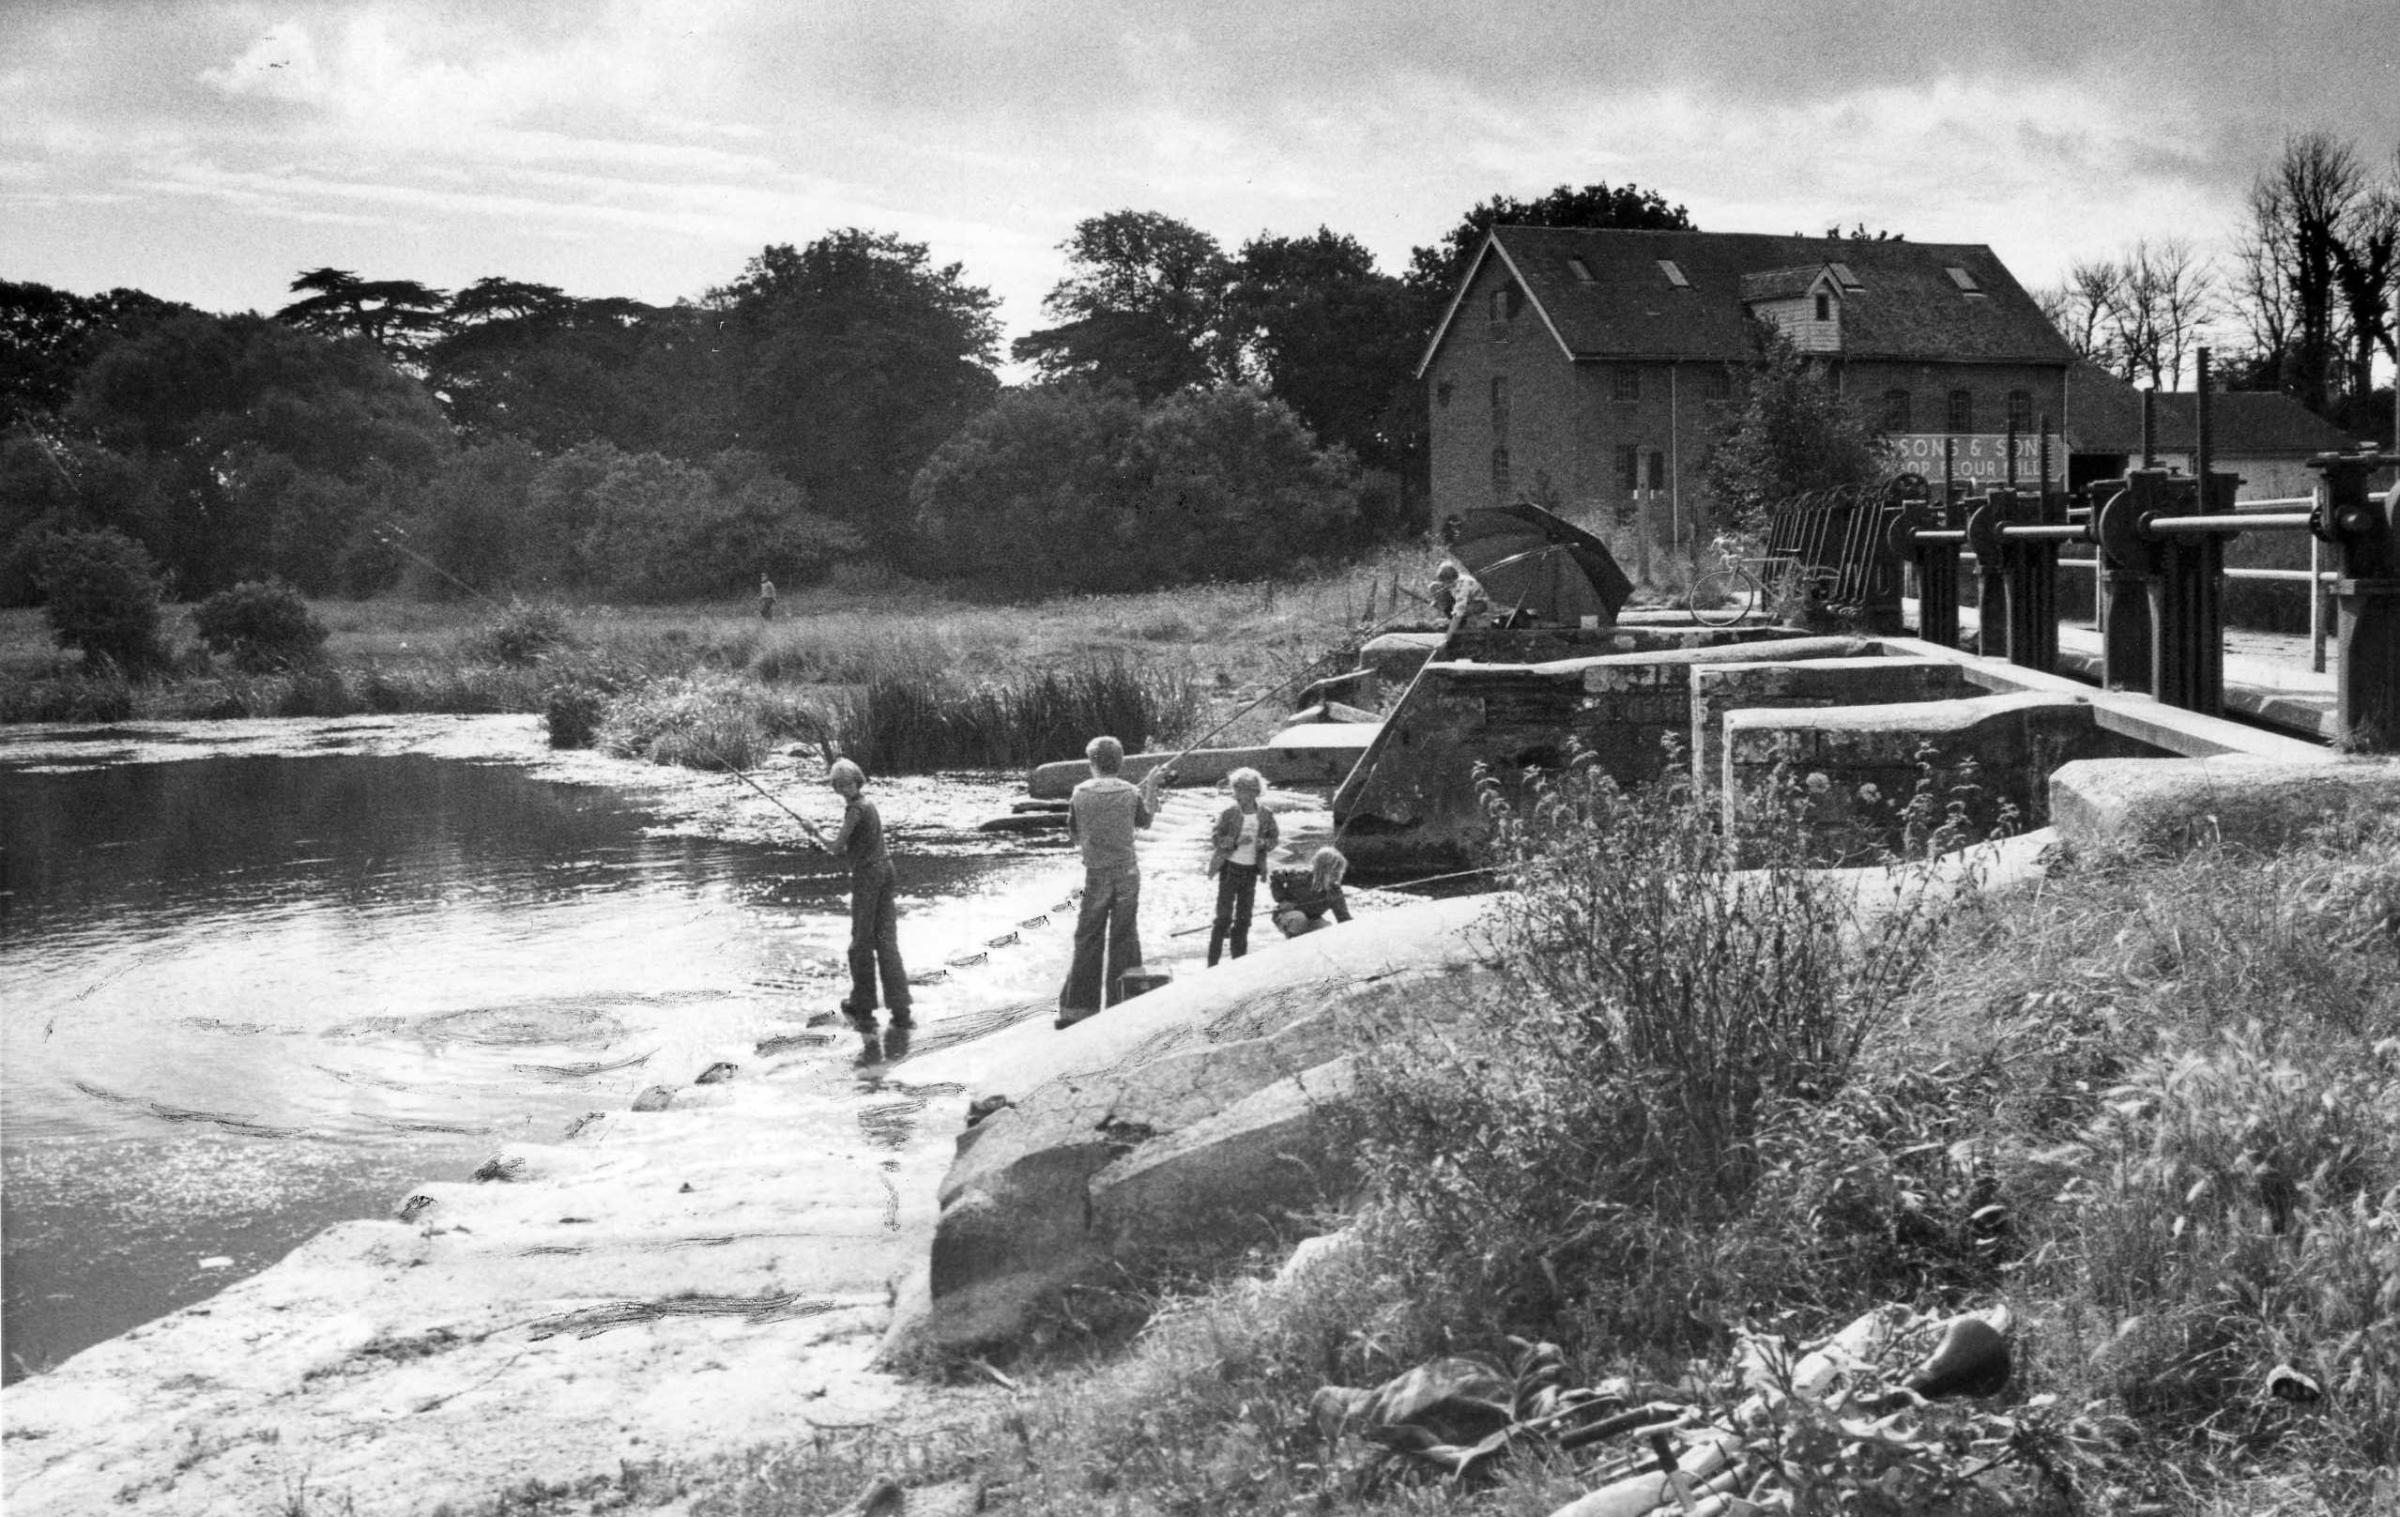 Fishing at Throop in 1977.